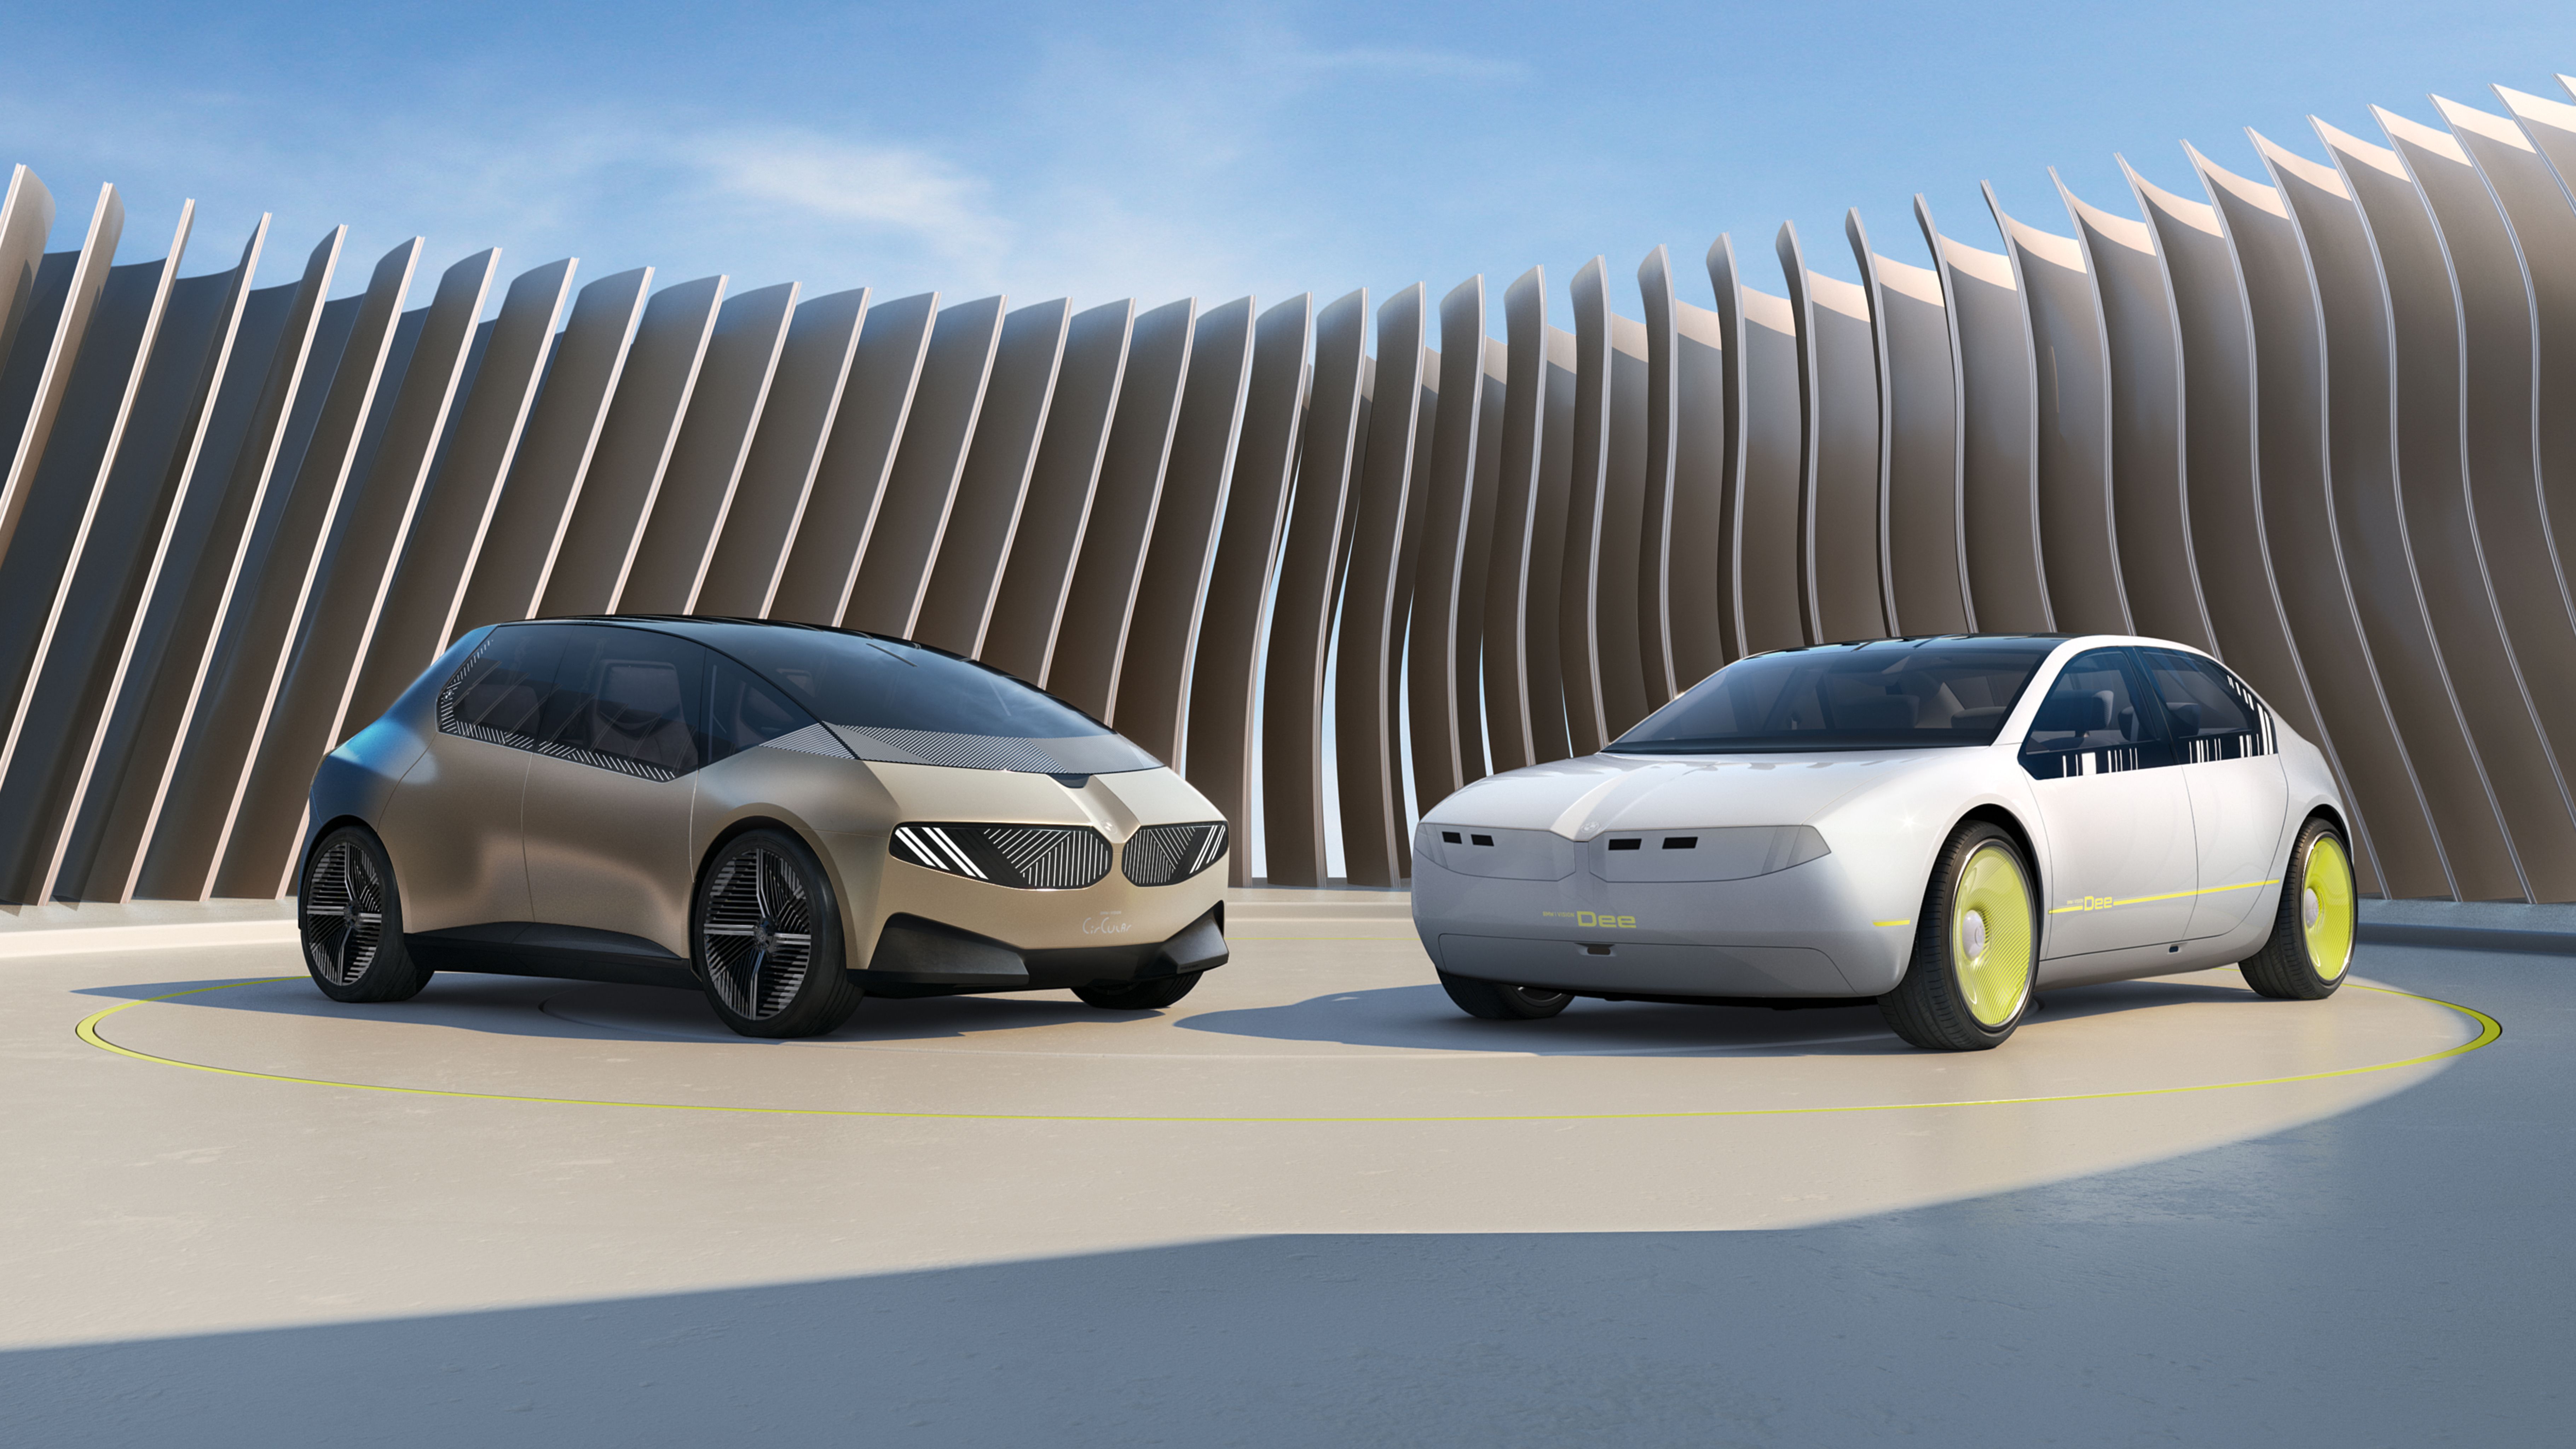 2023 BMW iVision Dee and 2021 BMW iVision Circular